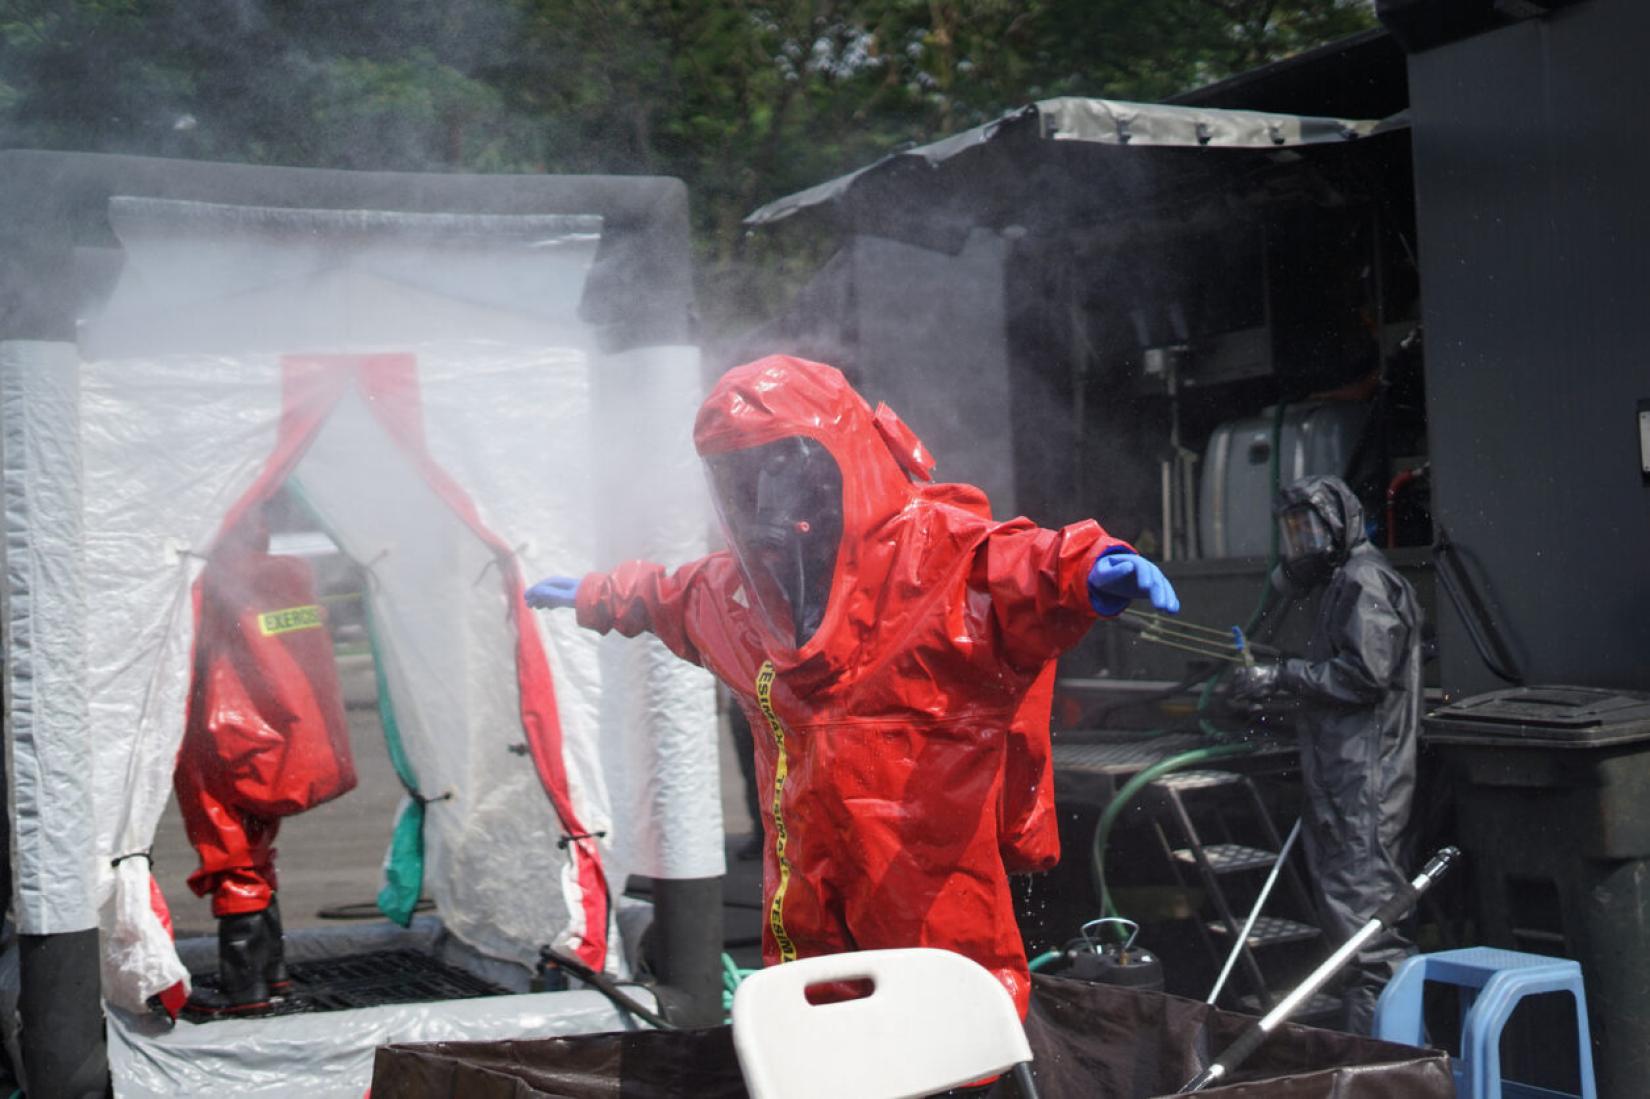 A person in a hazmat suit being sprayed